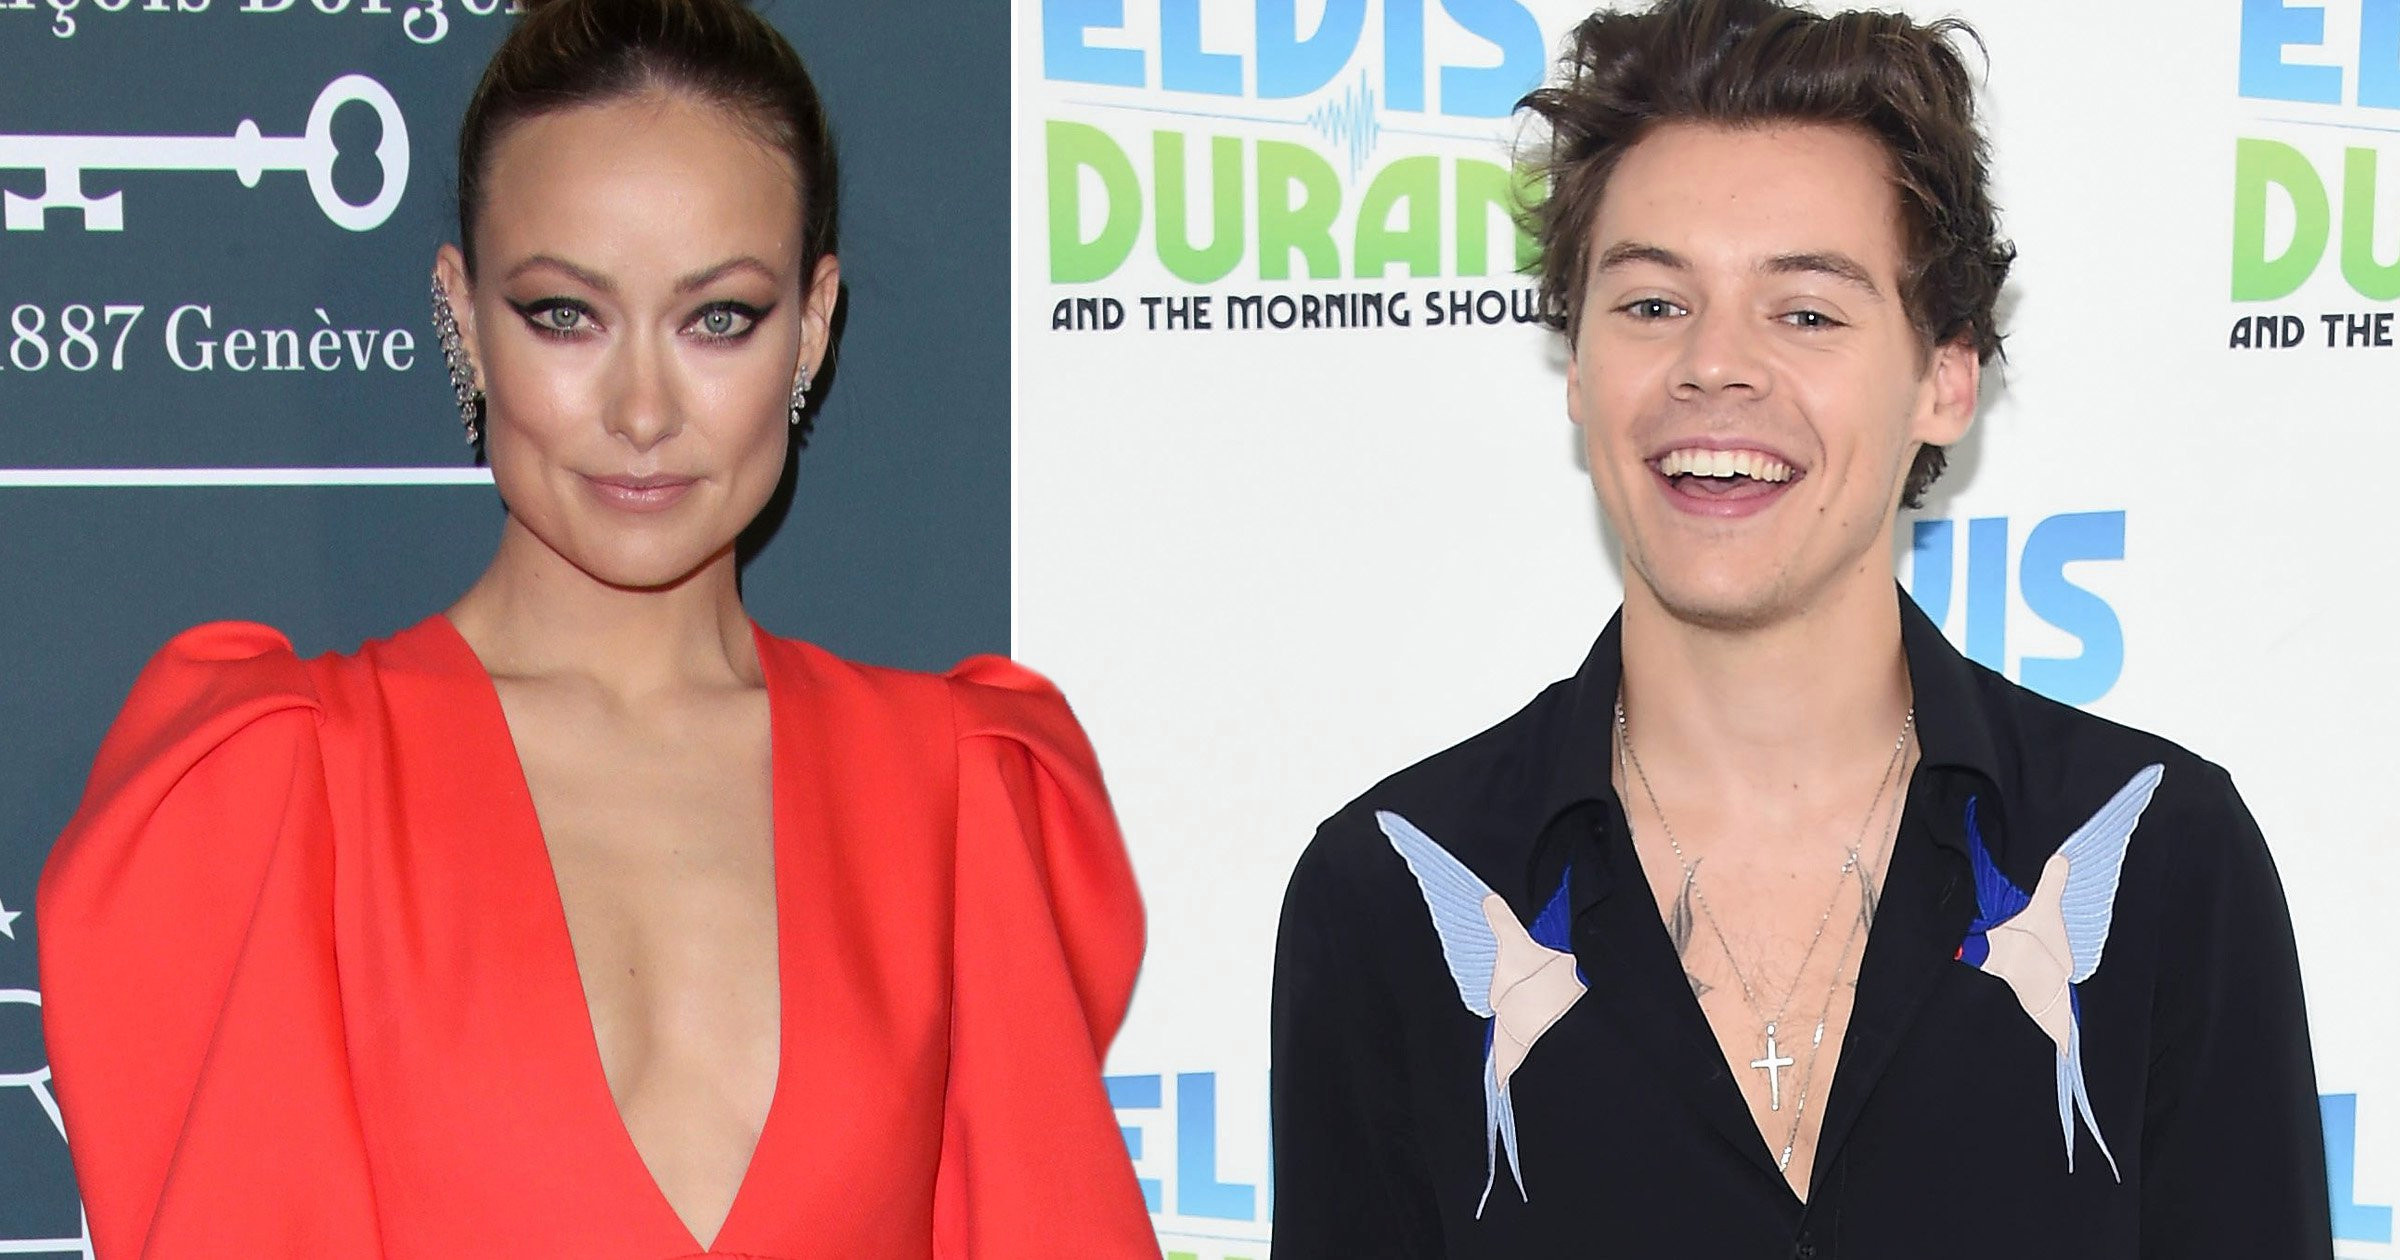 Harry Styles and Olivia Wilde ‘very happy’ together amid romance rumours